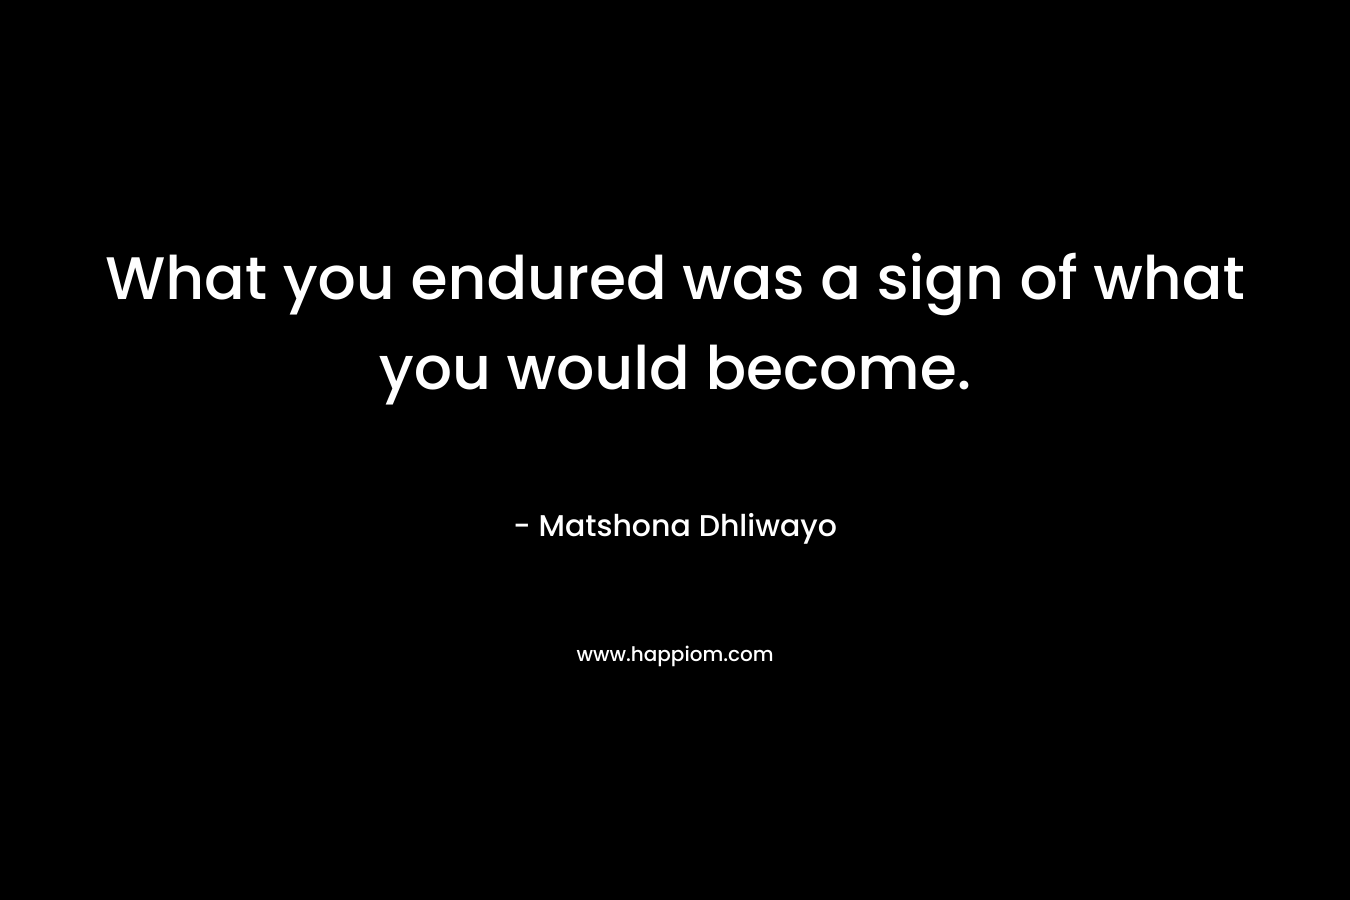 What you endured was a sign of what you would become.